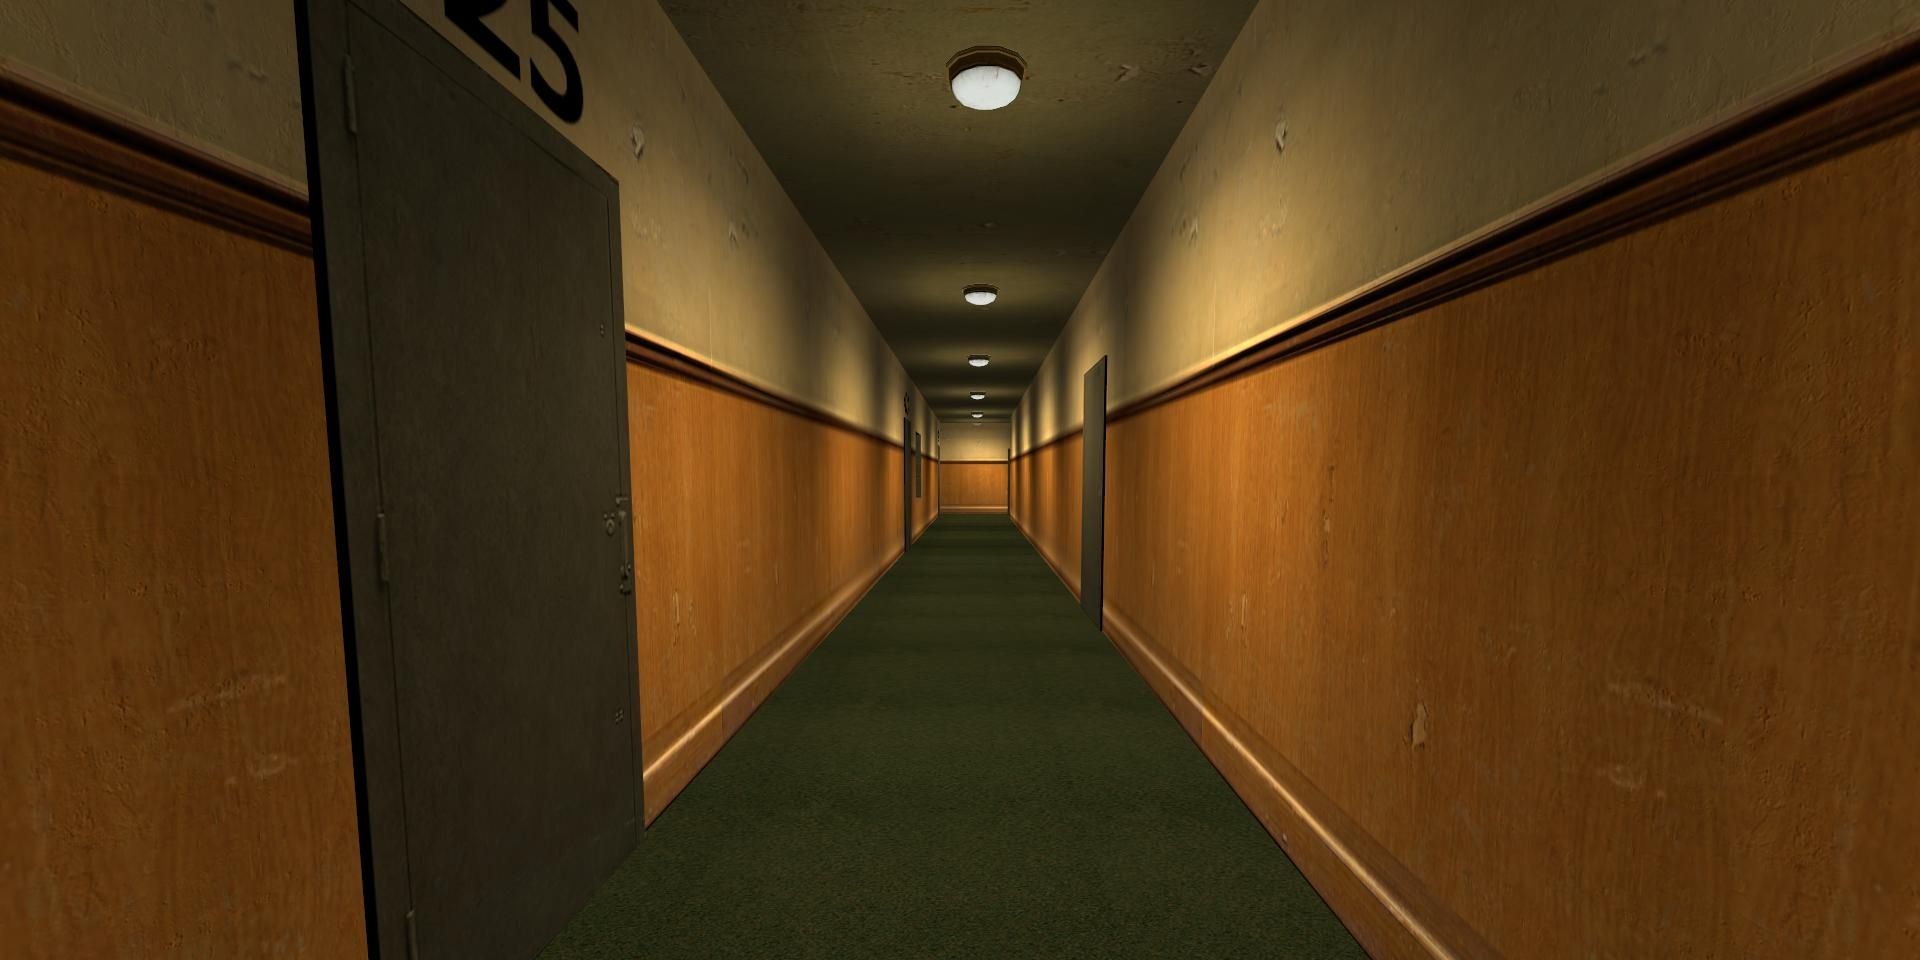 A long hallway in The Stanley Parable Half Life 2 Mod